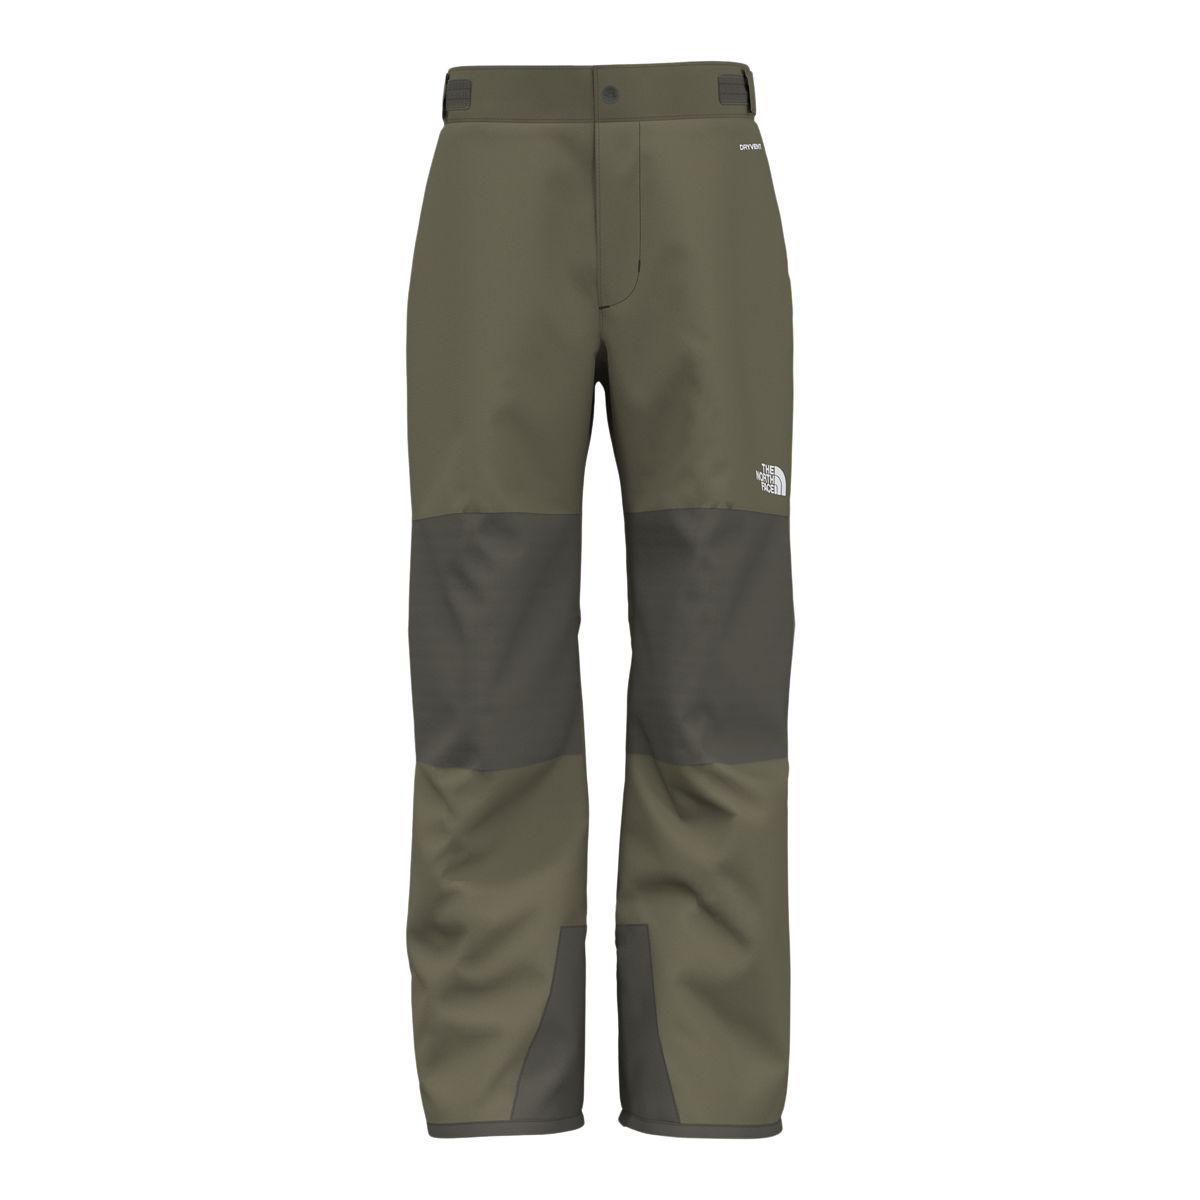 The North Face Kids' Freedom Snow Pants, Boys', Winter, Ski, Waterproof,  Insulated